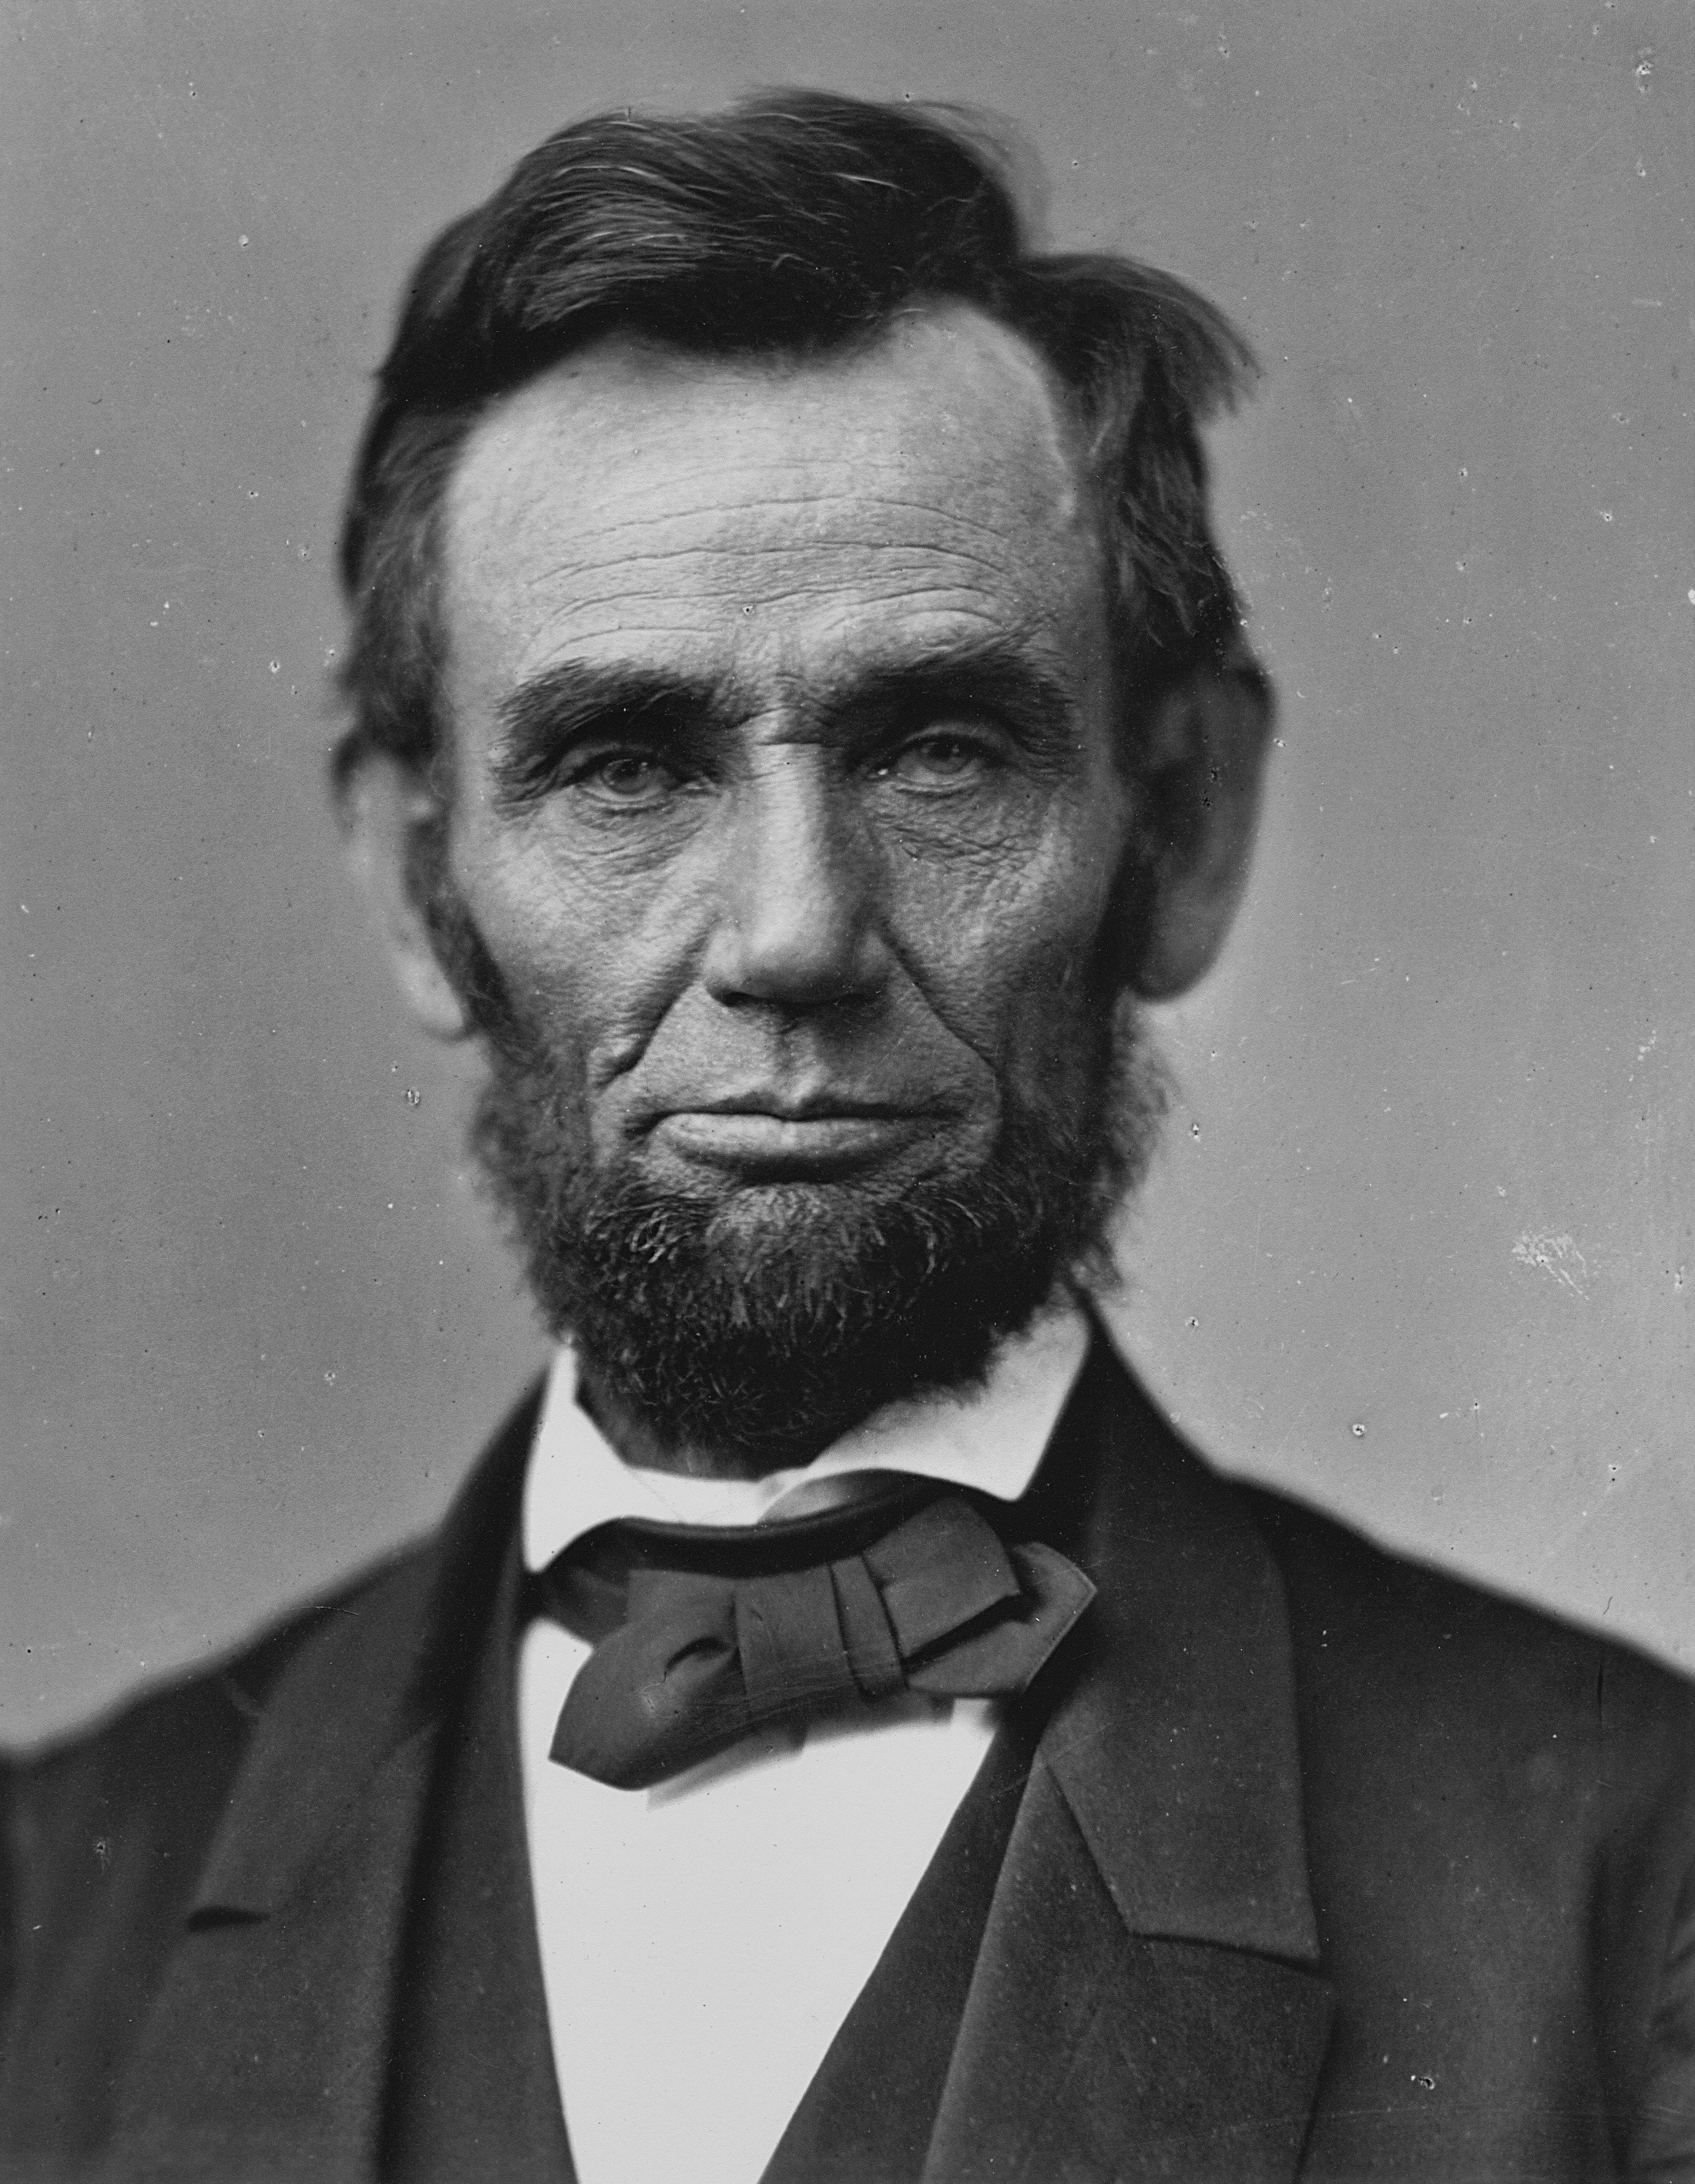 Abraham Lincoln was an American statesman and lawyer who served as the 16th president of the United States from 1861 until his assassination in 1865. | Wikipedia